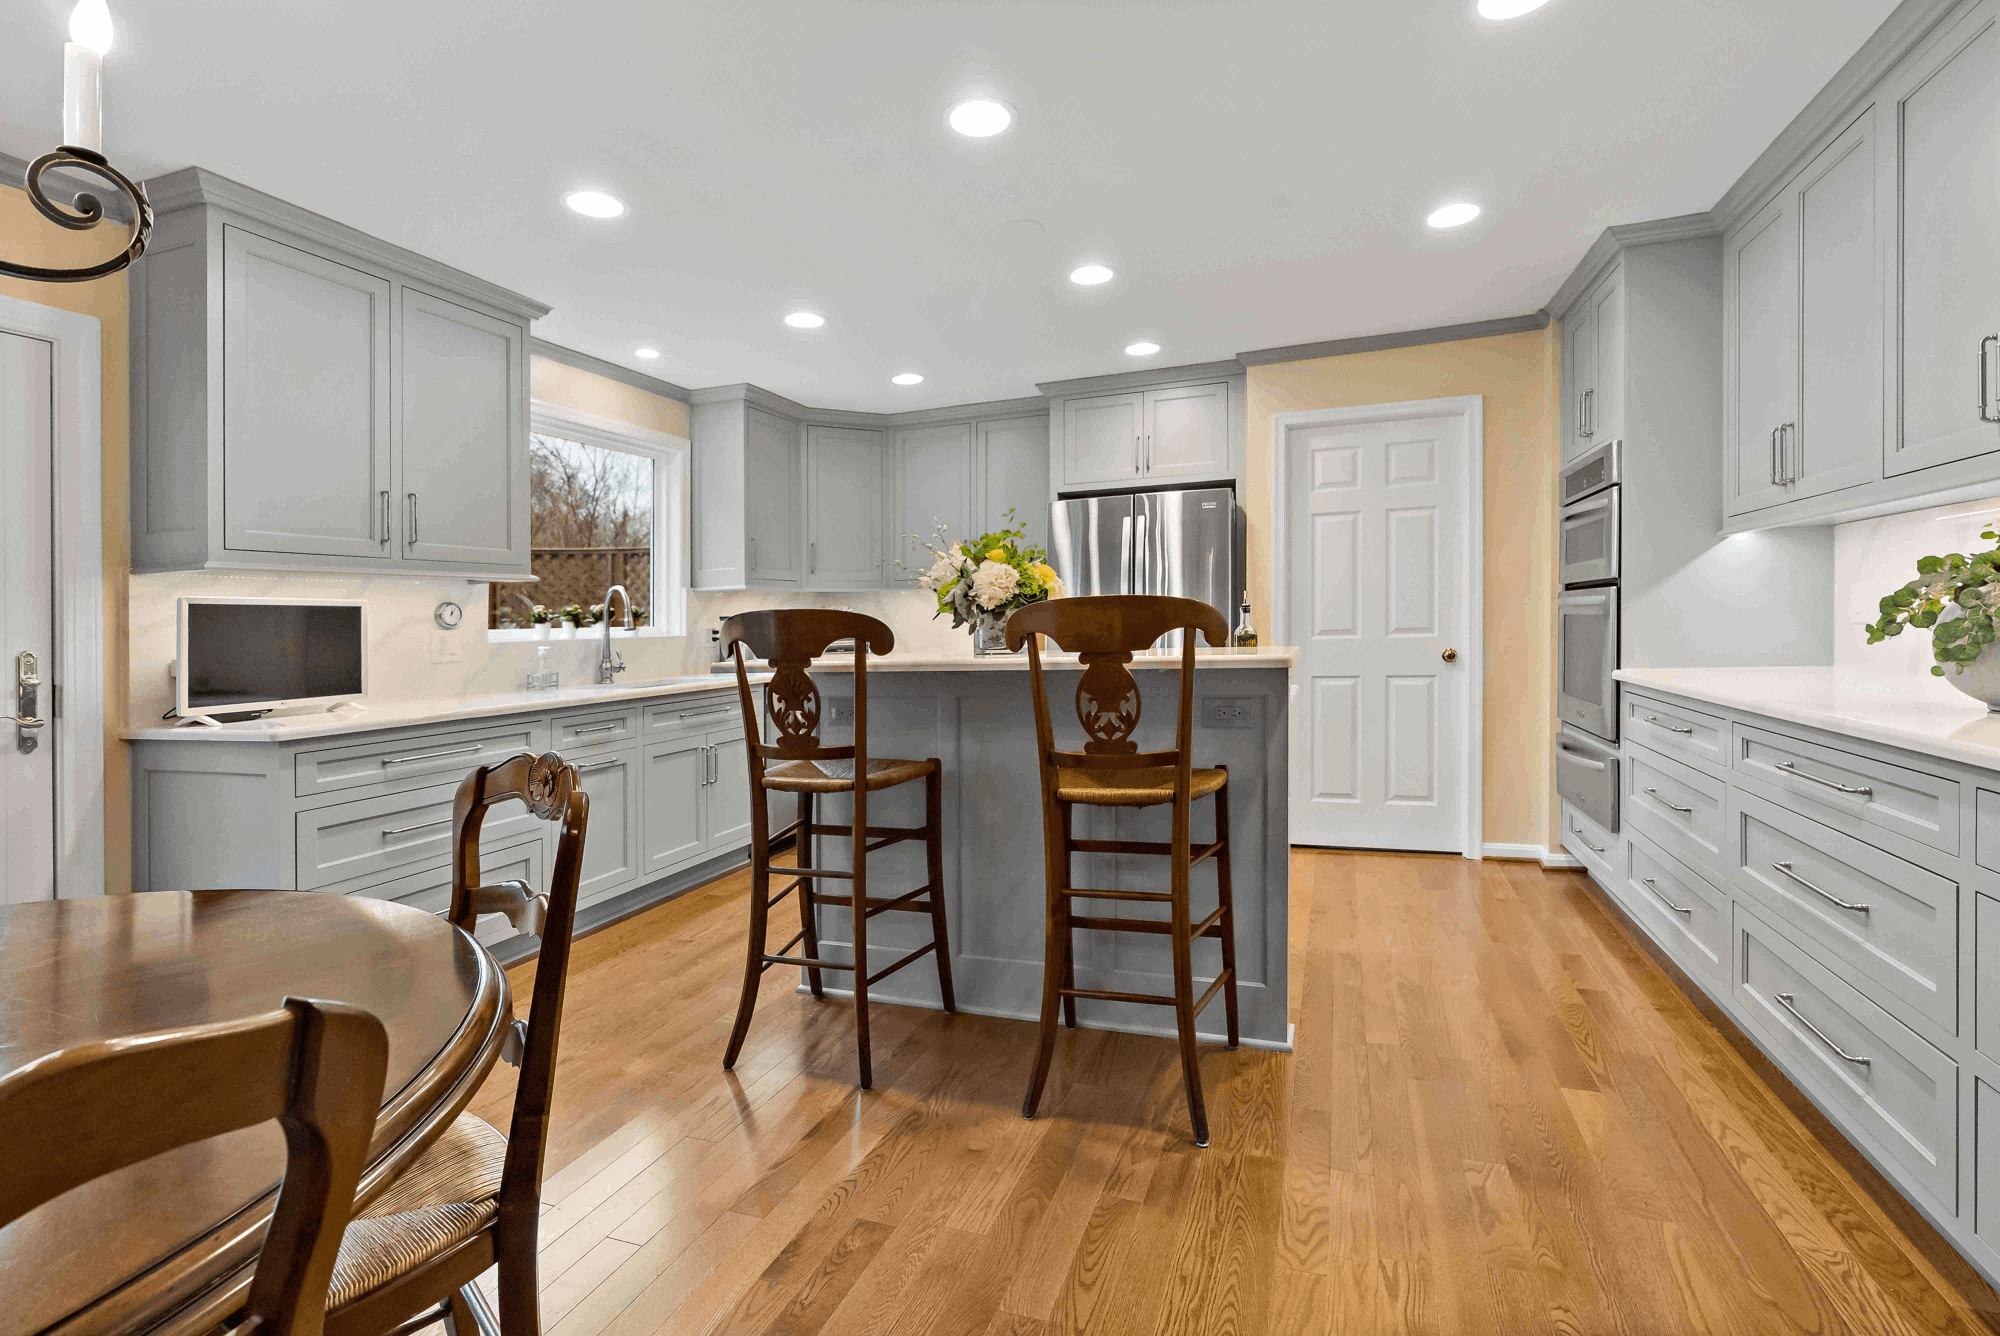 Wooden chairs and flooring in grey kitchen